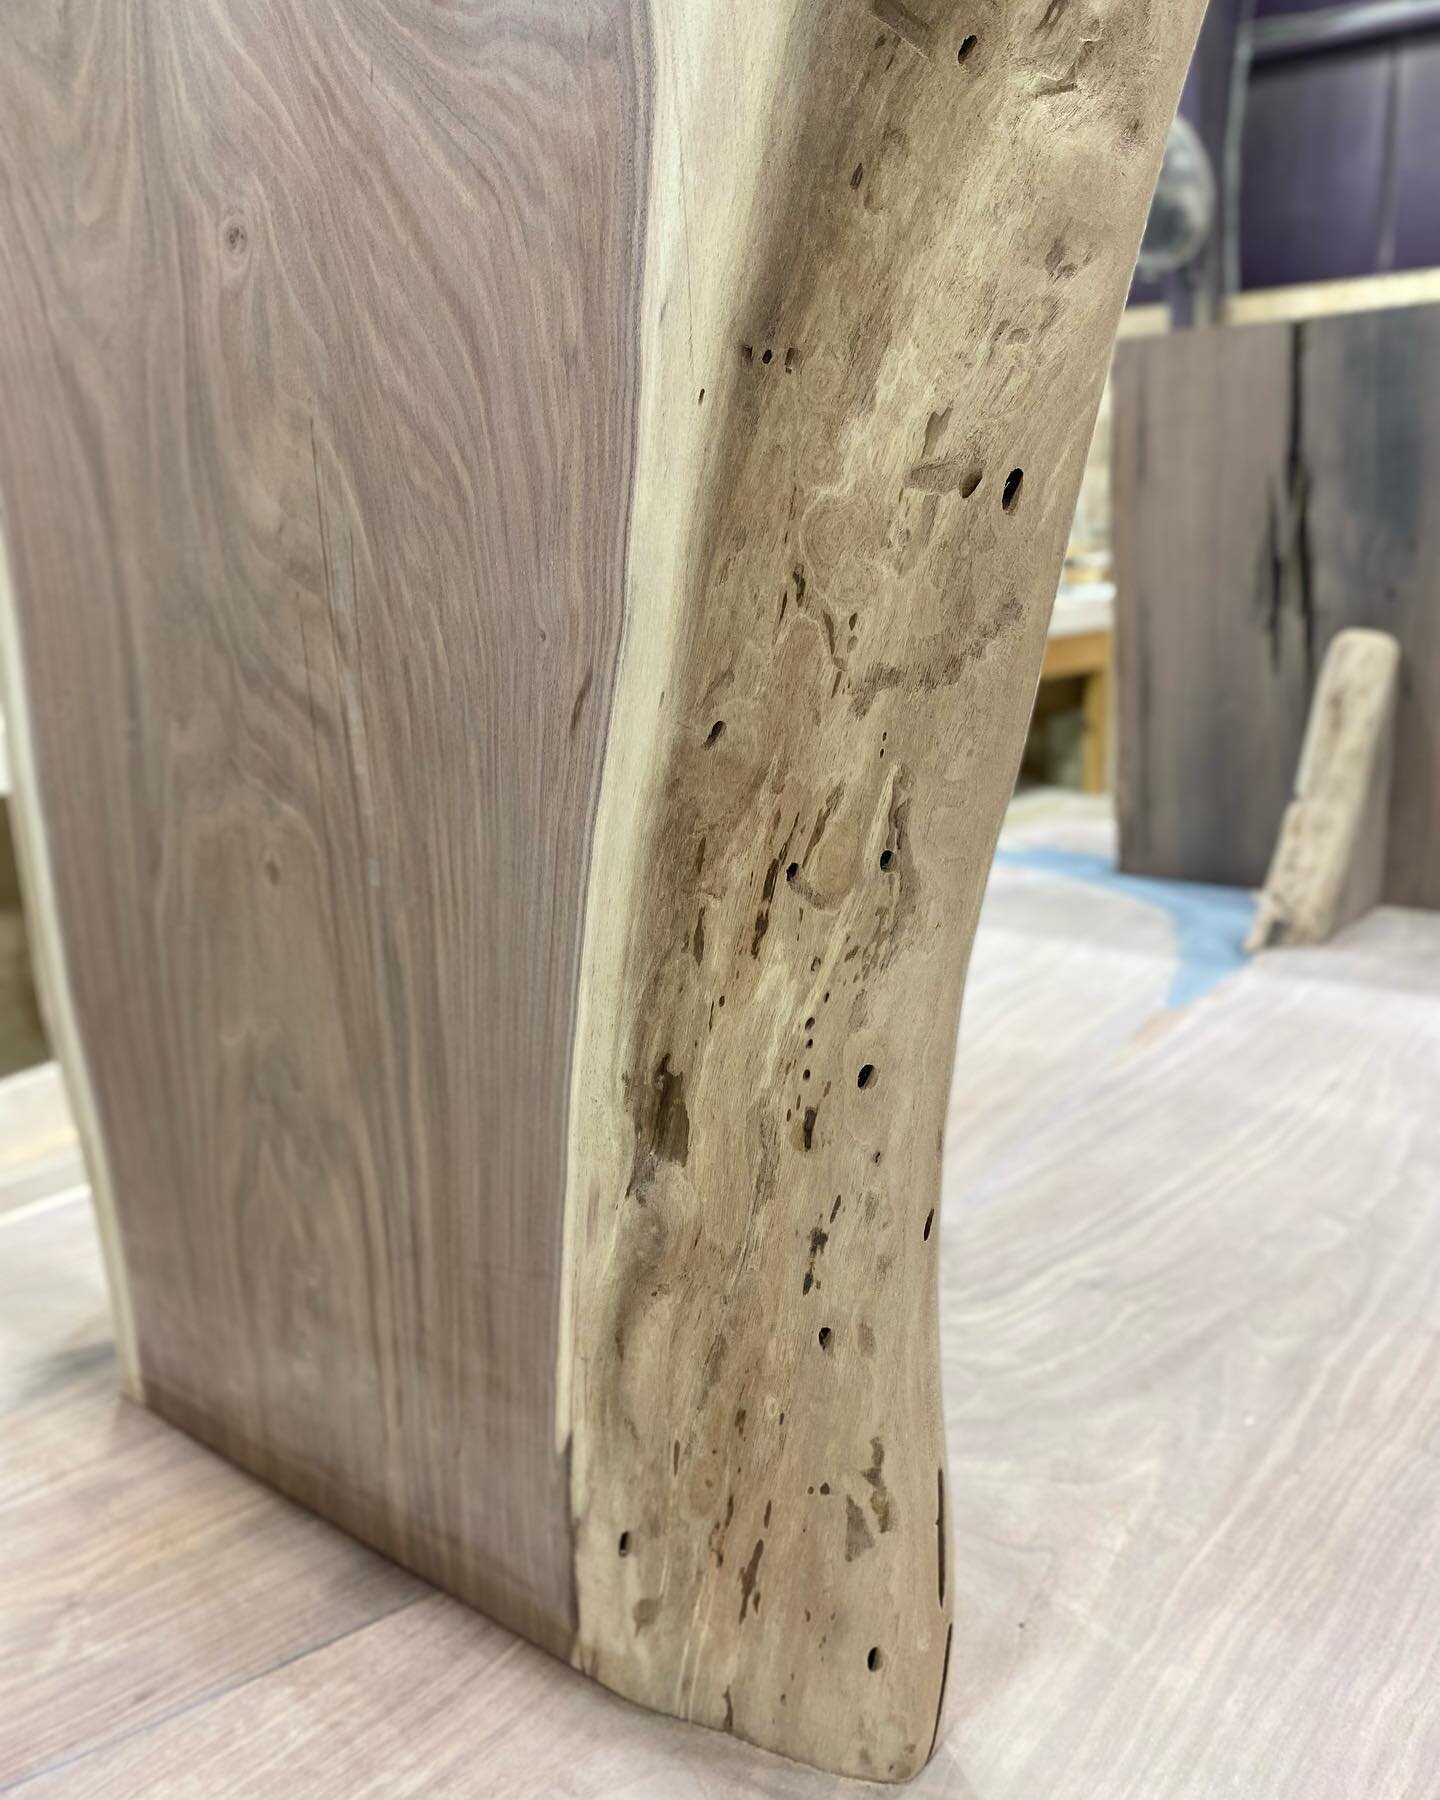 In Production // Custom Live Edge Walnut Table. Using cut-off pieces from top, these legs have been evolving into the perfect fit for this custom table. We absolutely love when we are given the opportunity to allow a piece to come together in such an